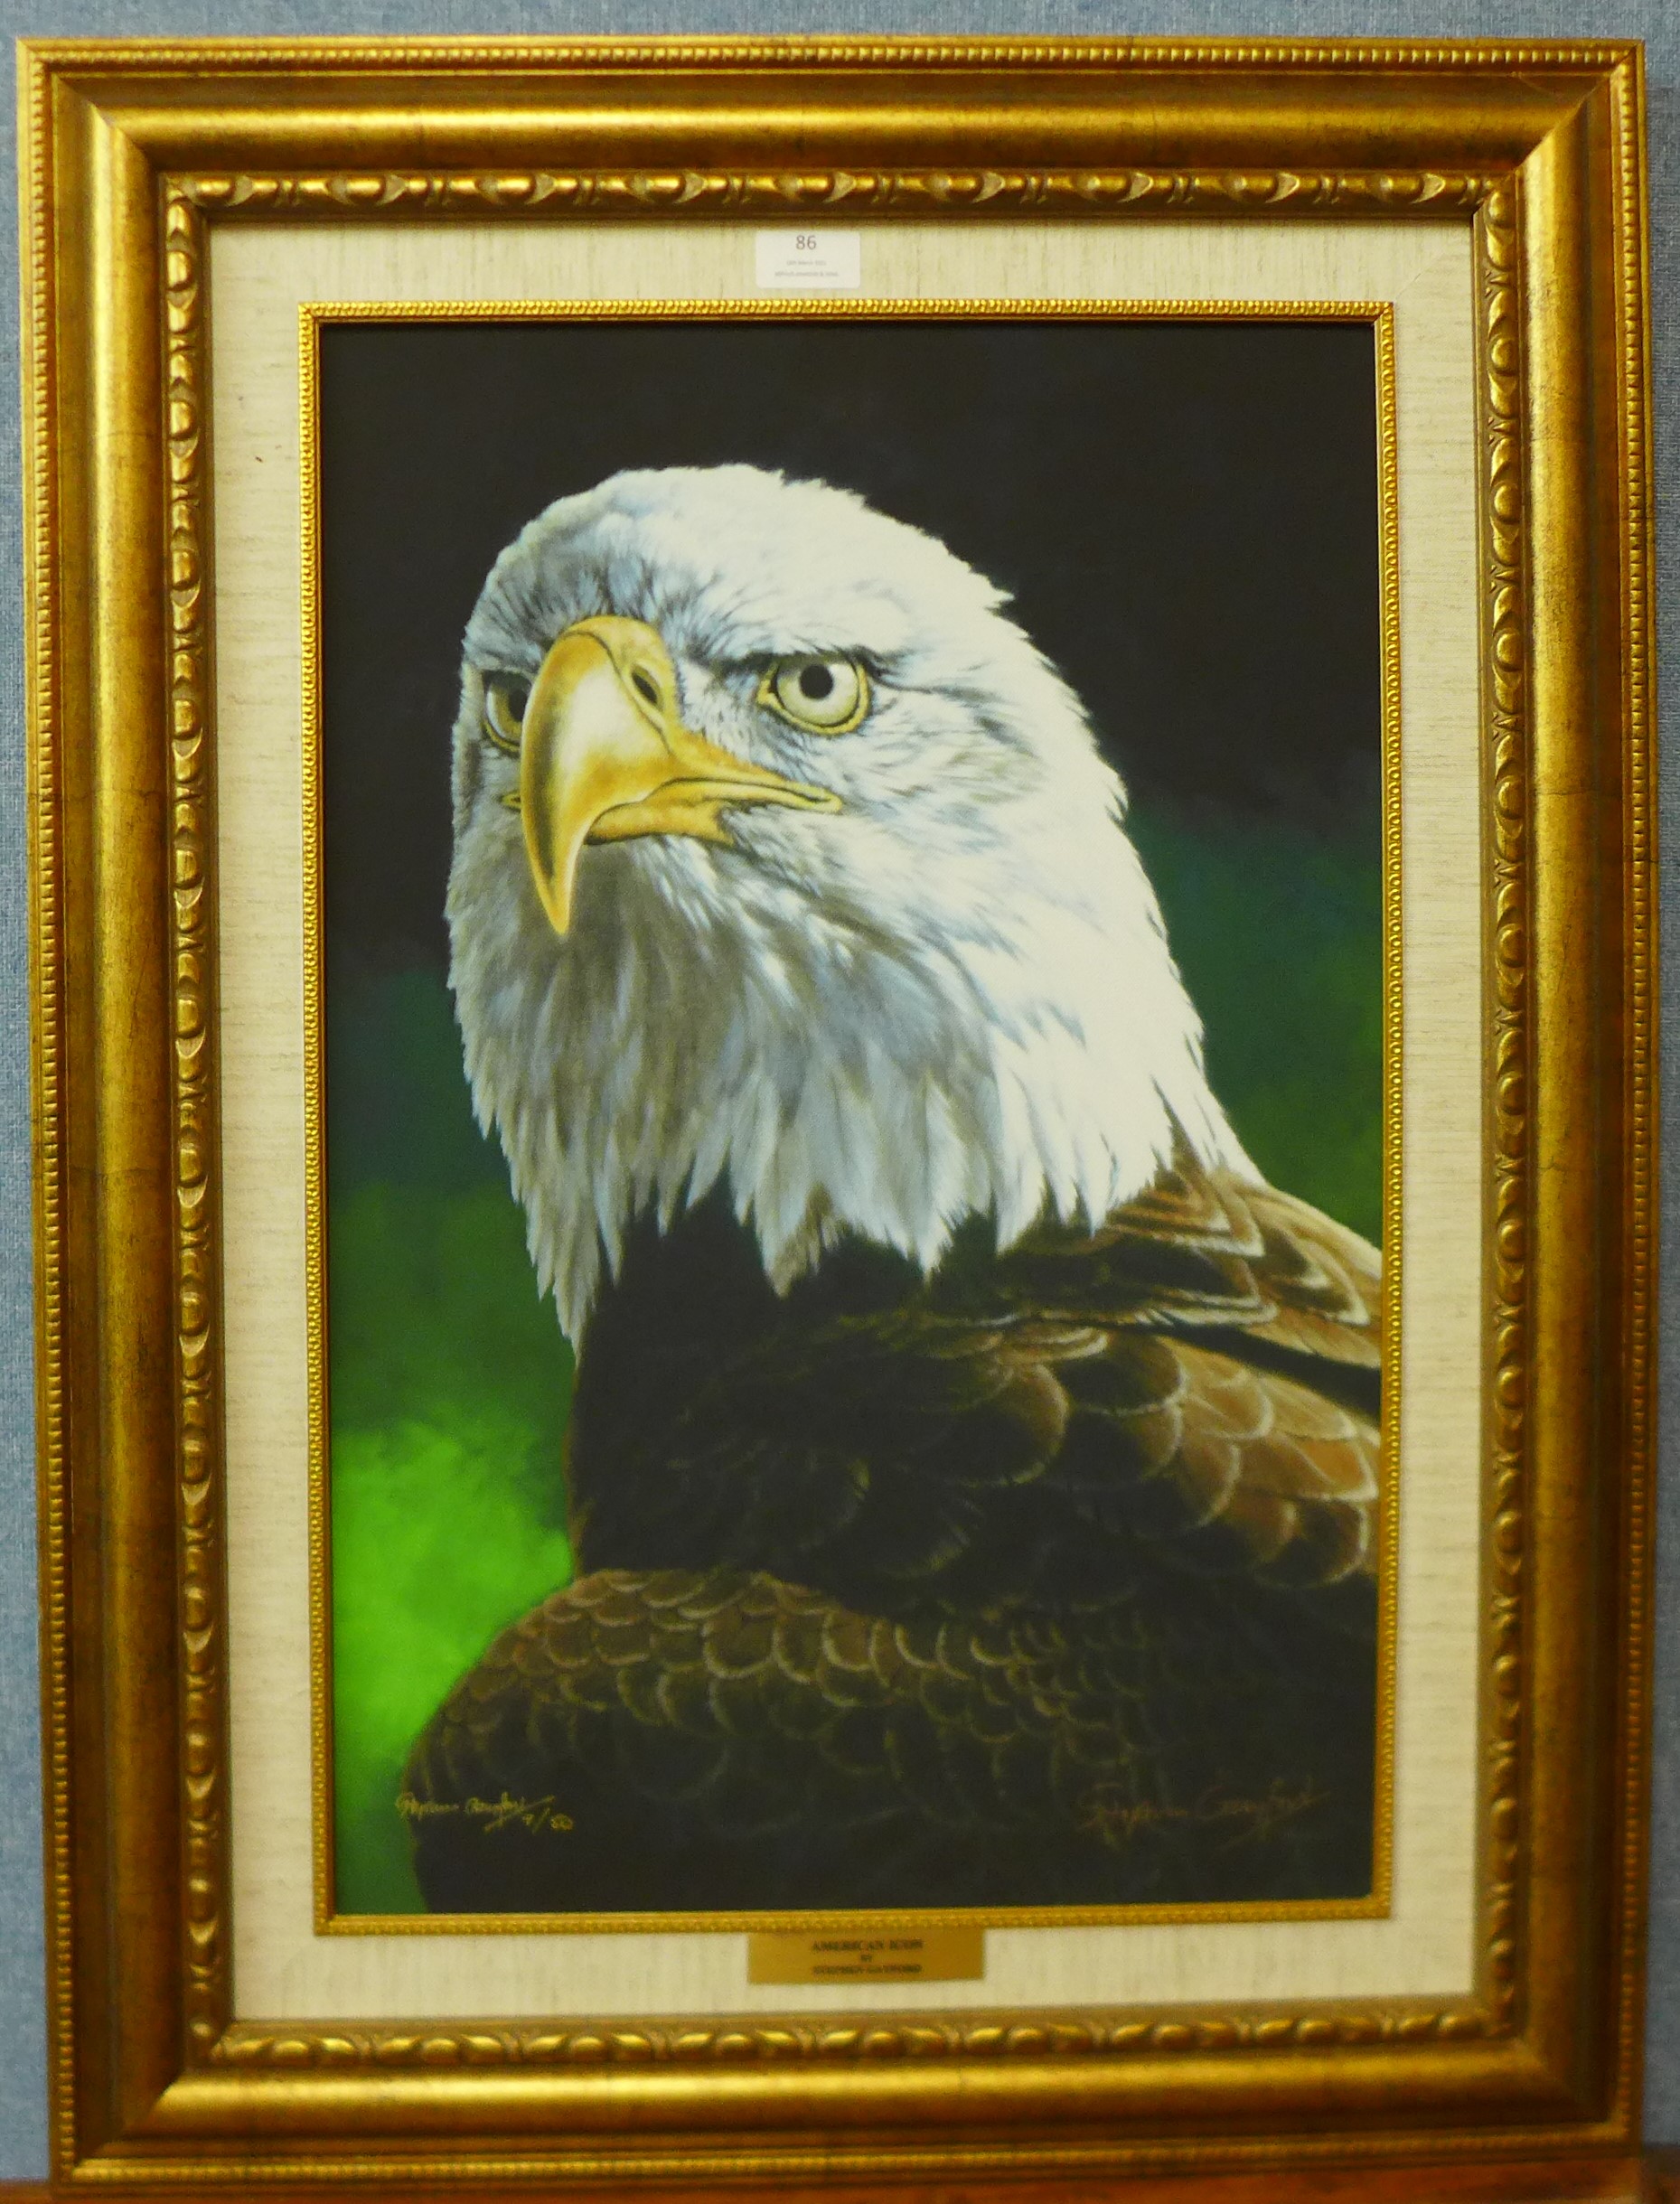 A signed Stephen Gayford limited edition print, American Icon, no. 9/50, 59 x 39cms, framed